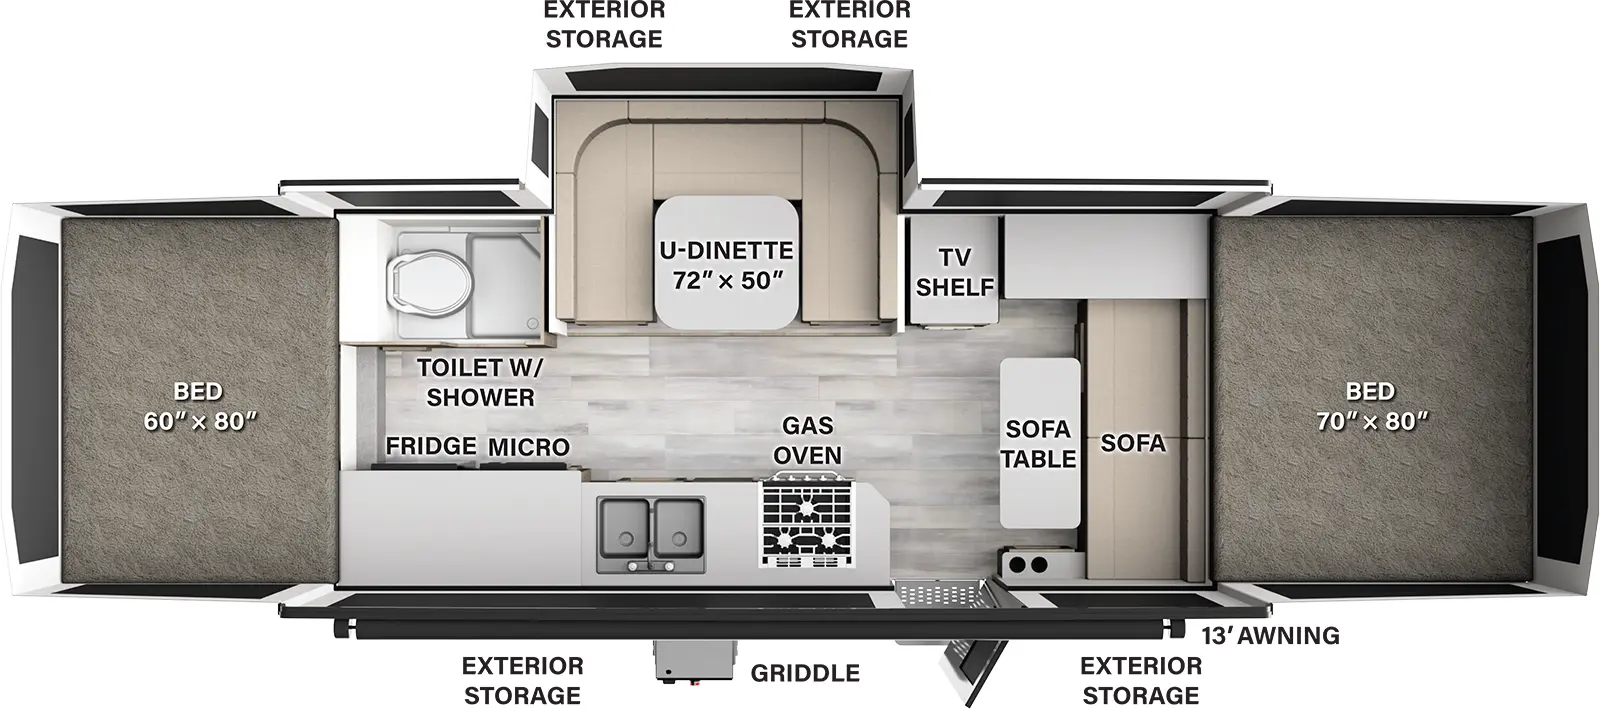 The HW29SC has one slideout and one entry door. Exterior features a 13 foot awning, griddle, and exterior storage on both sides. Interior layout front to back: front tent bed; sofa, sofa table, cabinet, and TV shelf; off-door side u-dinette slideout and toilet with shower; door side entry, gas oven, sink and cabinet with microwave and refrigerator; rear tent bed. 